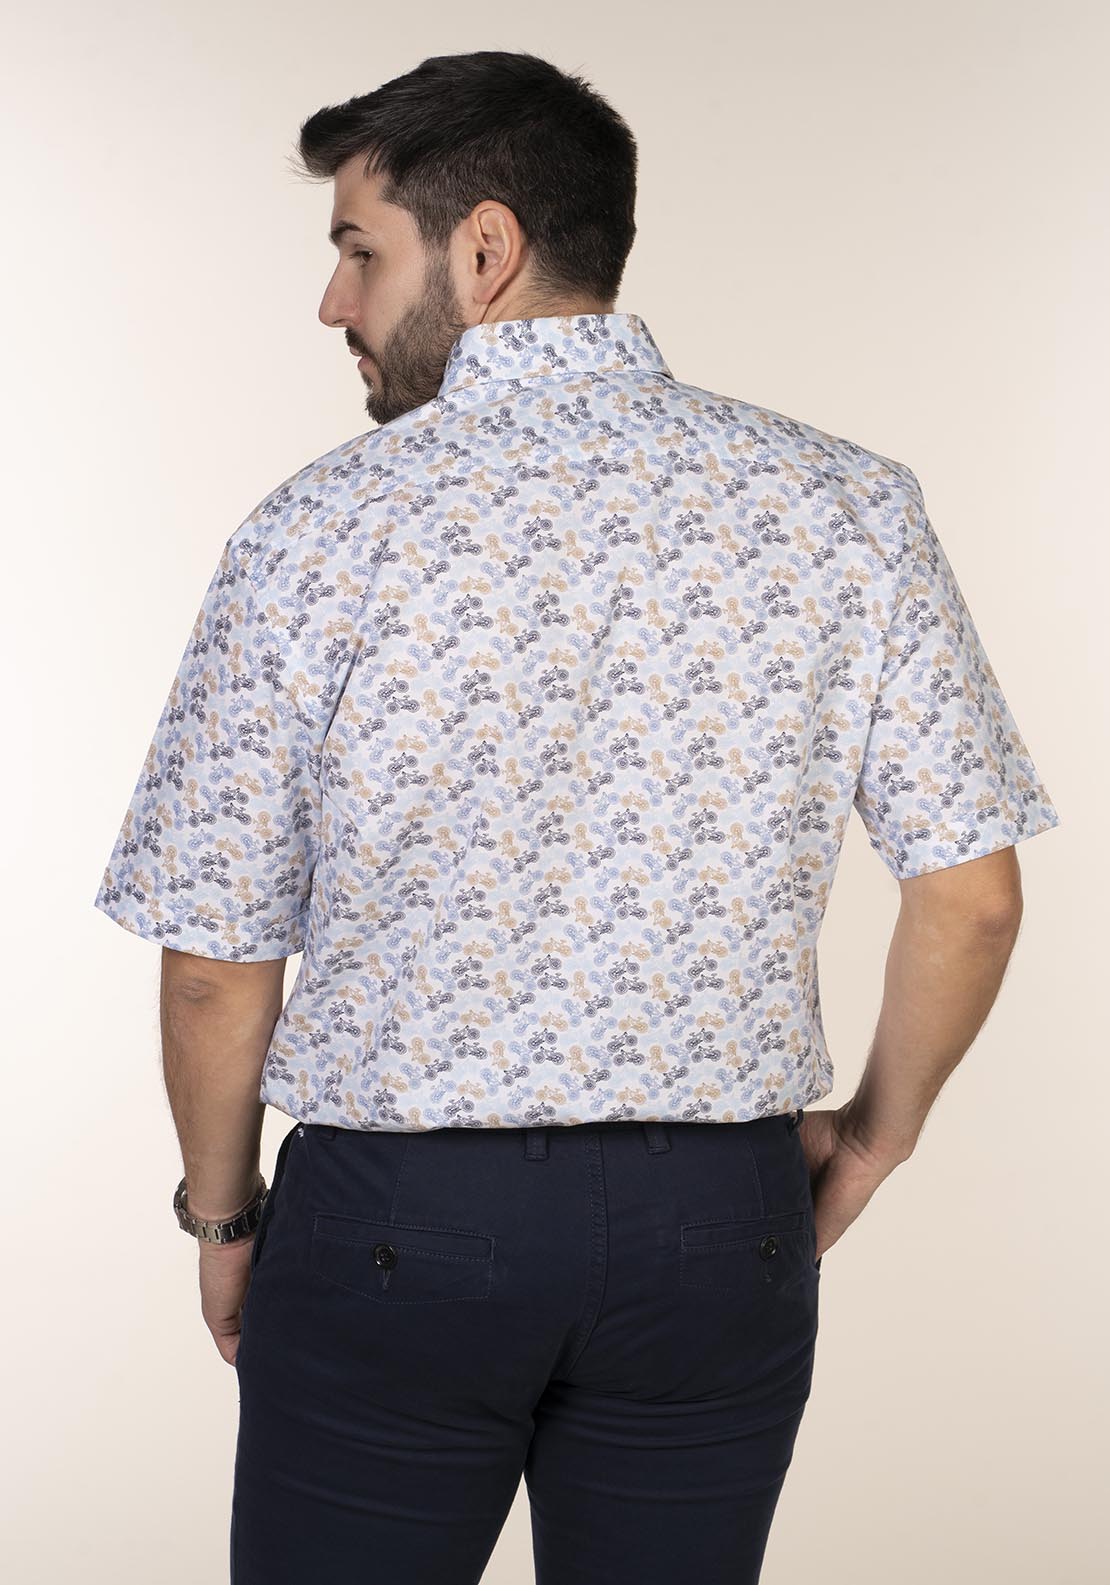 Yeats Casual Patterned Short Sleeve Shirt 5 Shaws Department Stores